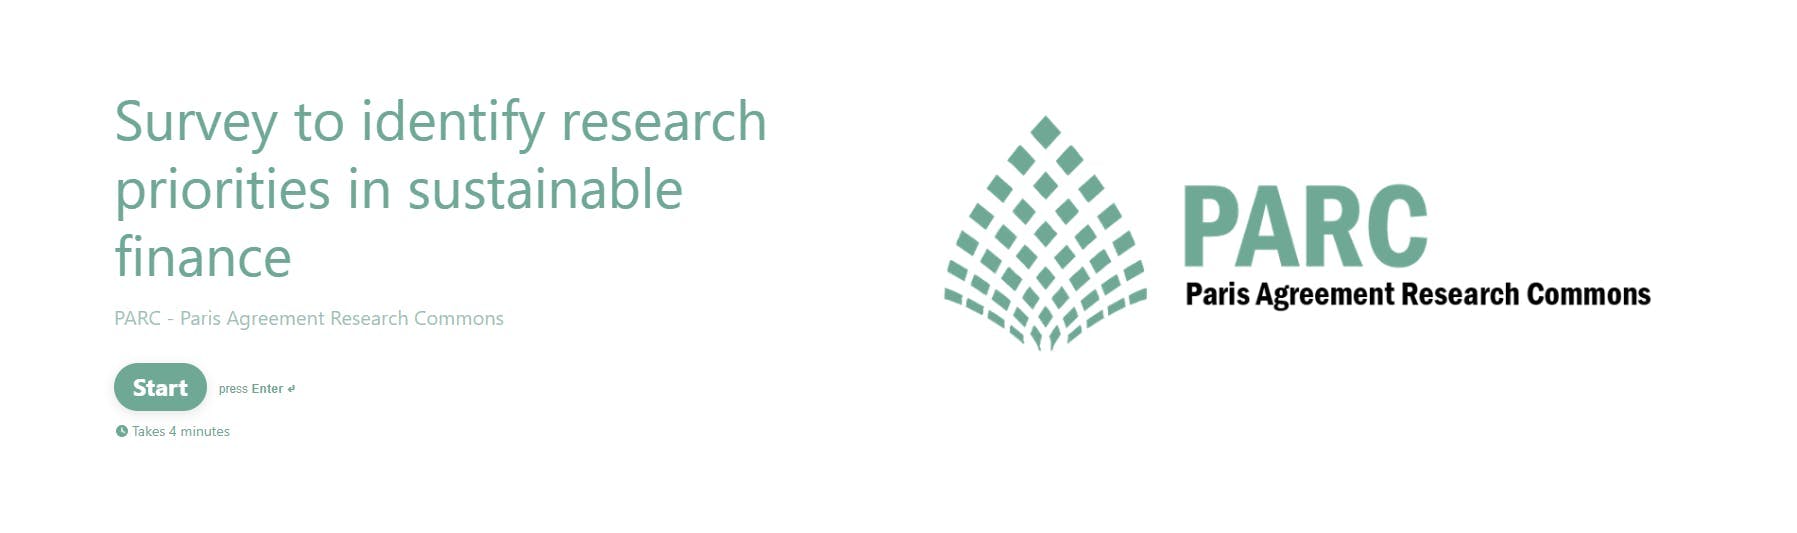 Survey to identify research priorities in sustainable finance